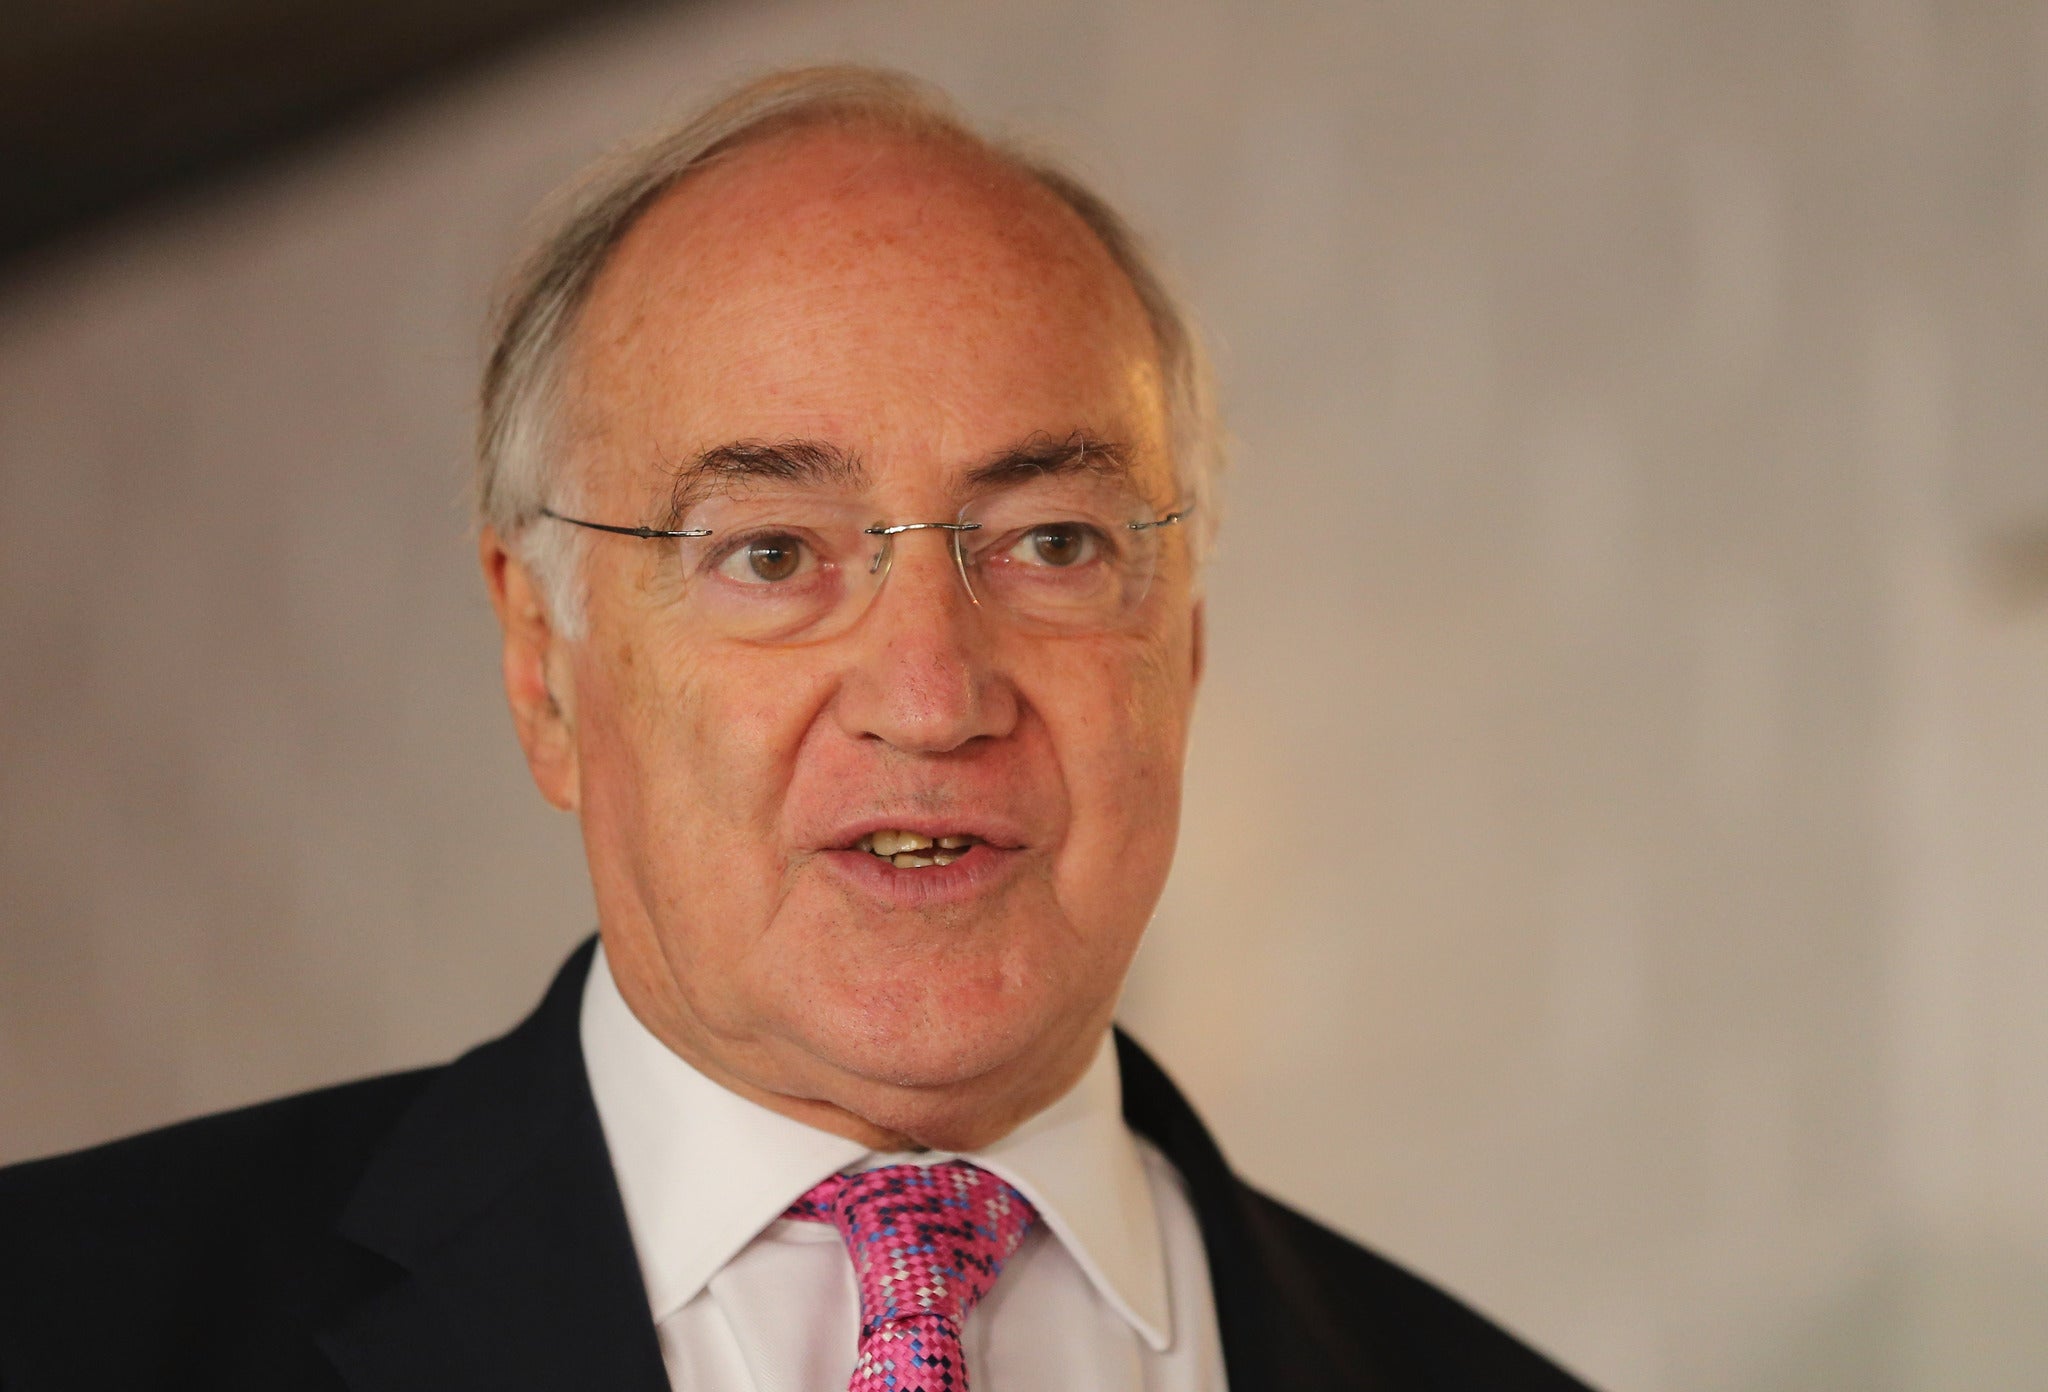 Former Home Secretary Michael Howard chairs the board of Soma Oil and Gas,